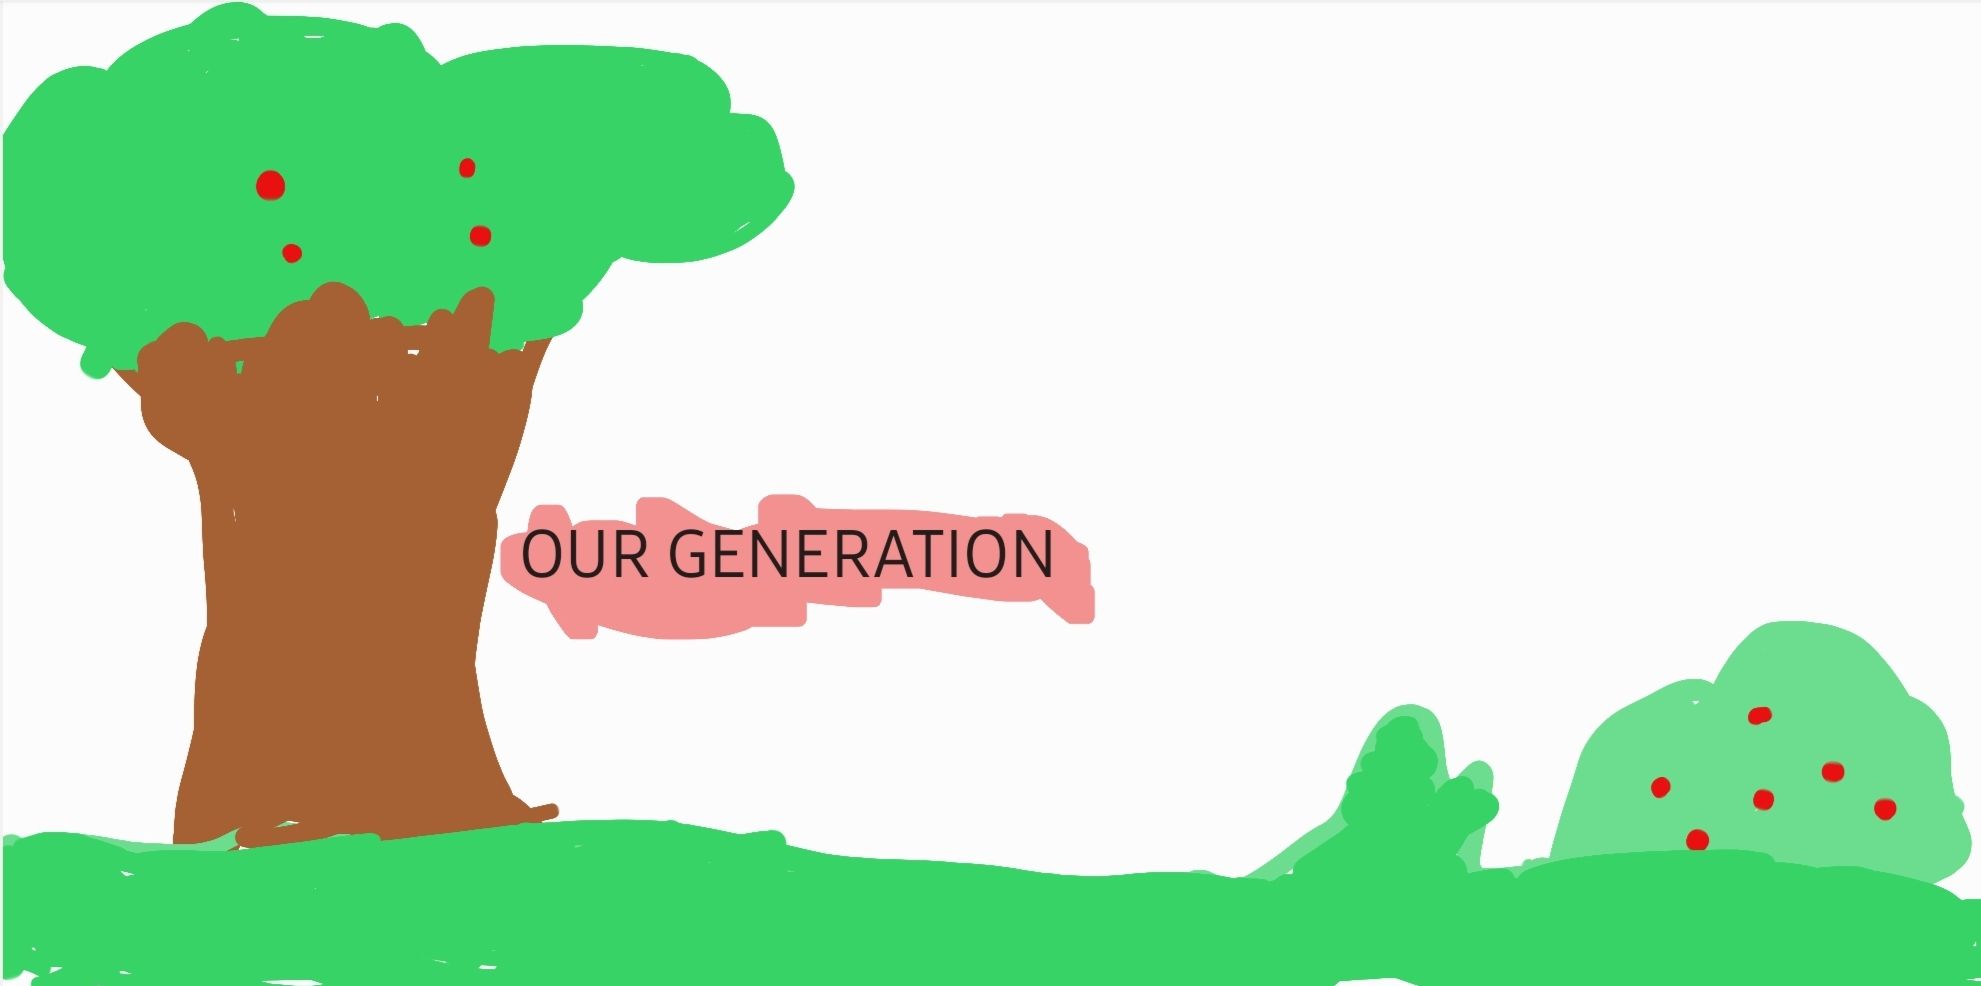 My Generation (Our generation – kids, tweens, and teens)